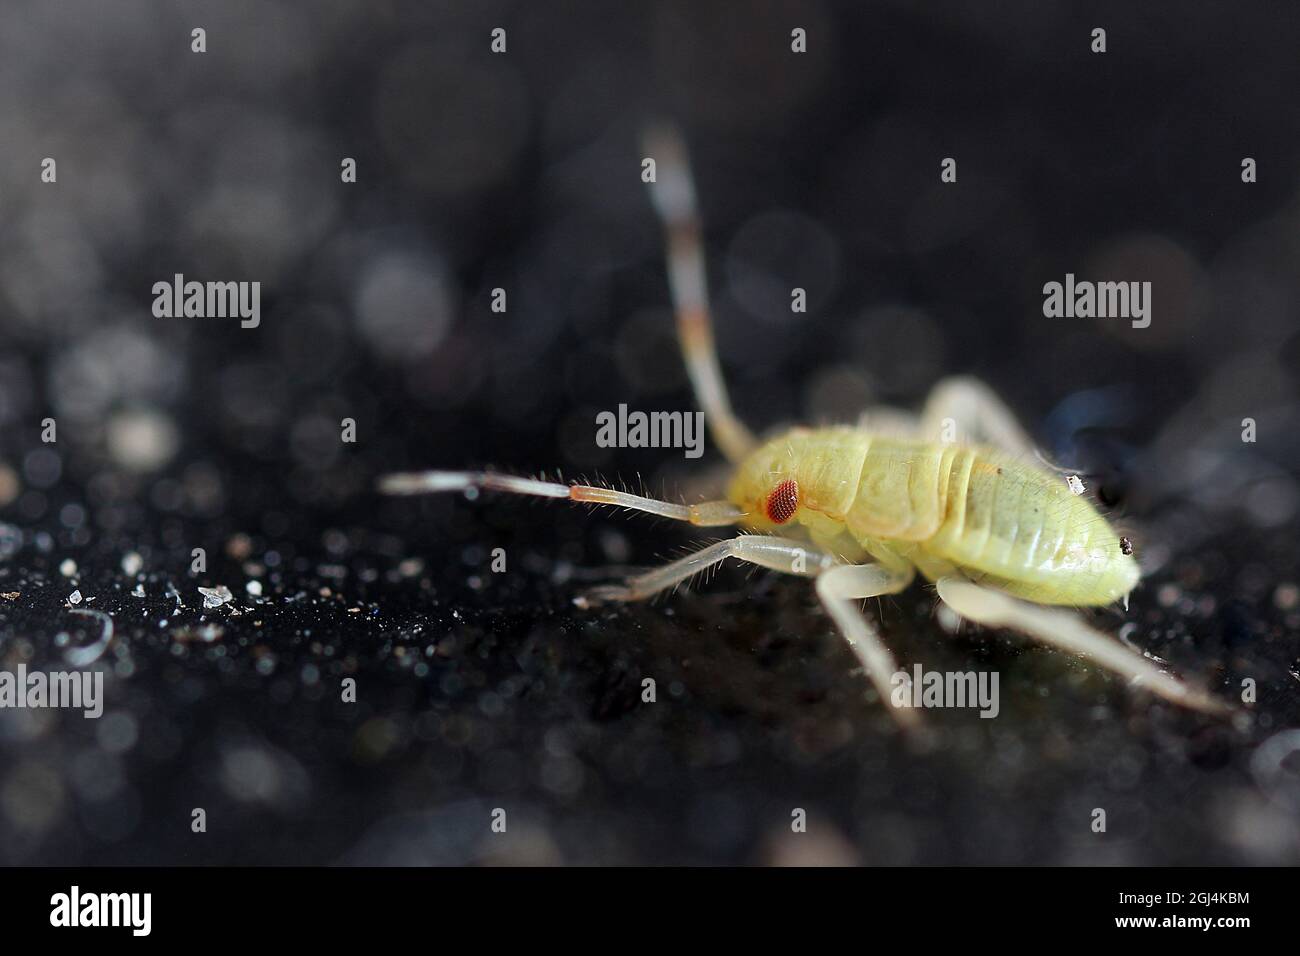 Juvenile insect - first instar, probably a plant sap sucker (Miridae) Stock Photo